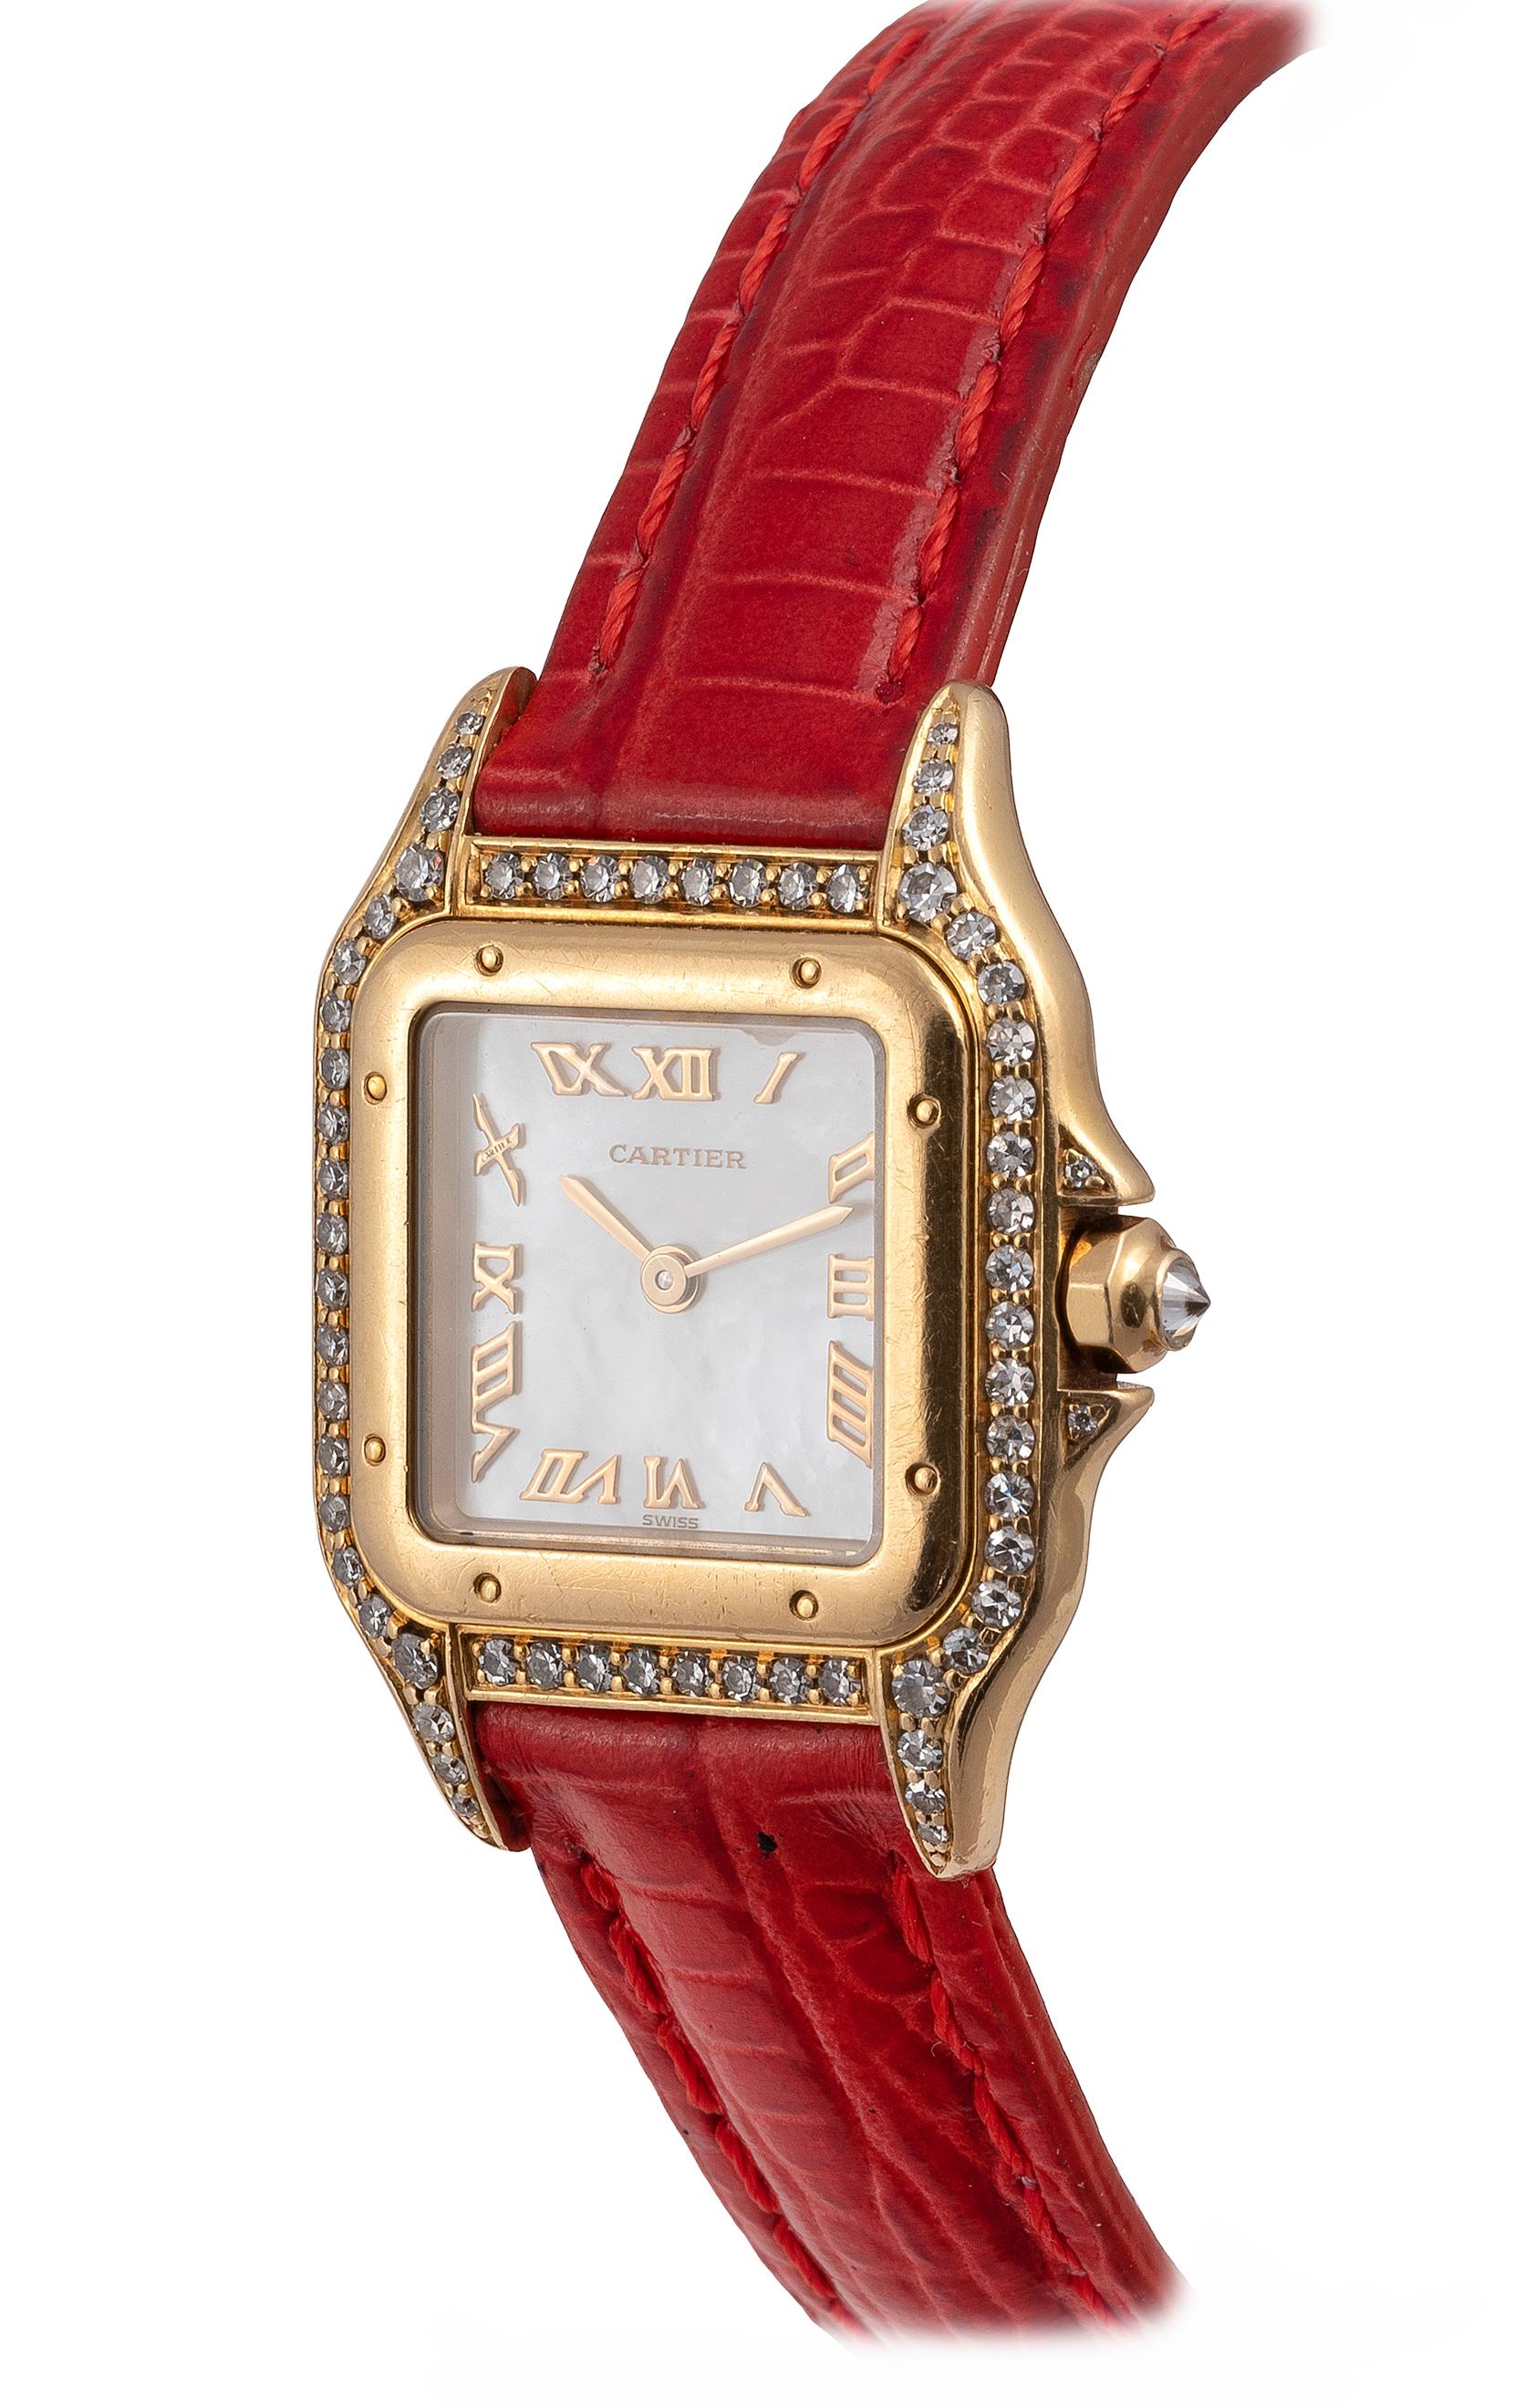 Two-body, solid, polished and brushed, case back with 8 screws, bezel with 8 pins, bezel and lugs set with 62 round diamonds, protected octagonal diamond-set winding-crown, sapphire crystal. Mother of the pearl with applied radial Roman numerals,